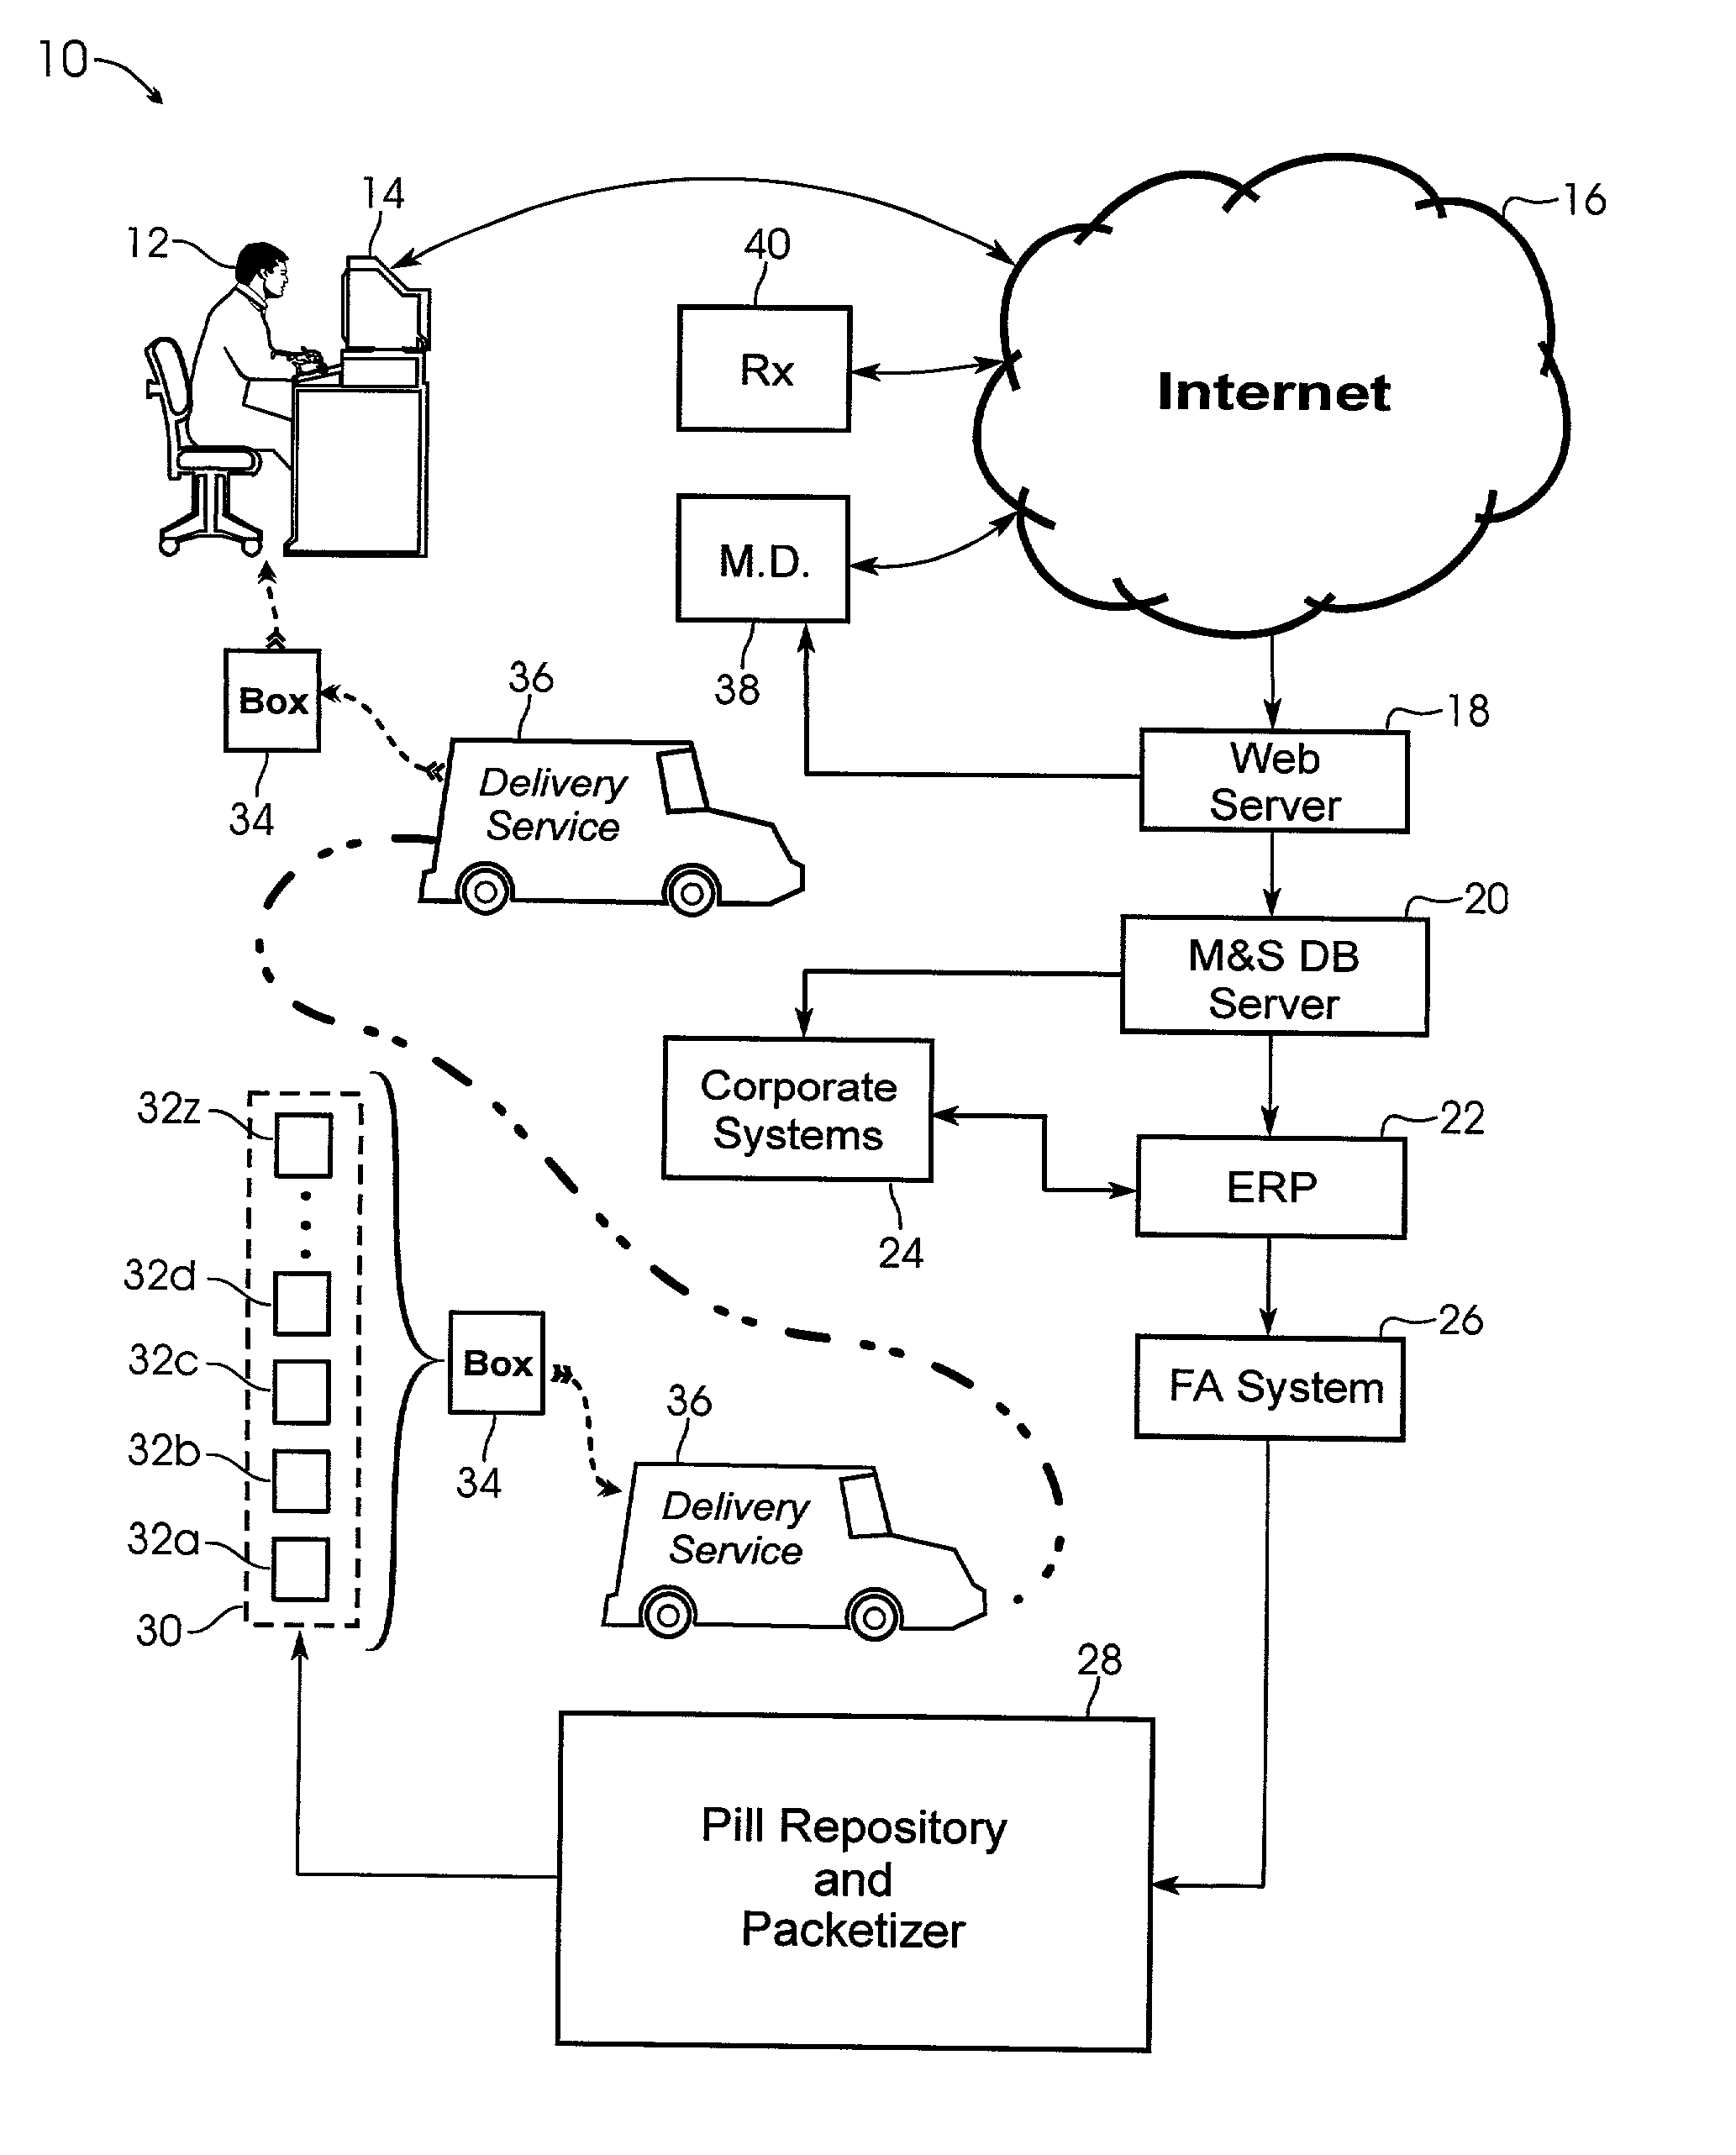 System and method for providing temporal patient dosing